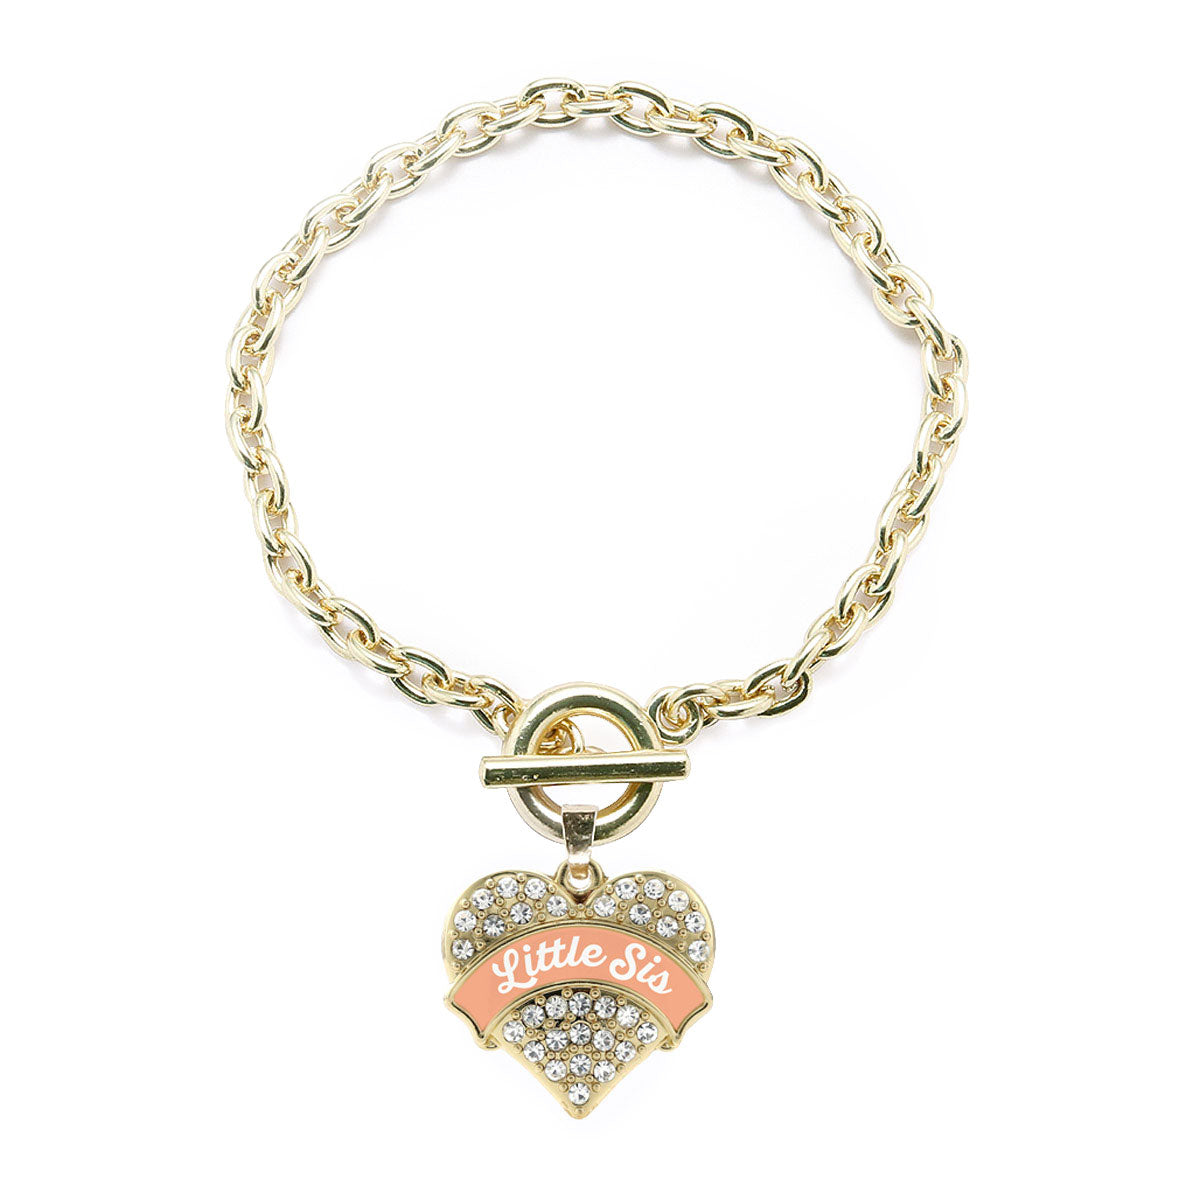 Gold Peach Little Sister Pave Heart Charm Toggle Bracelet